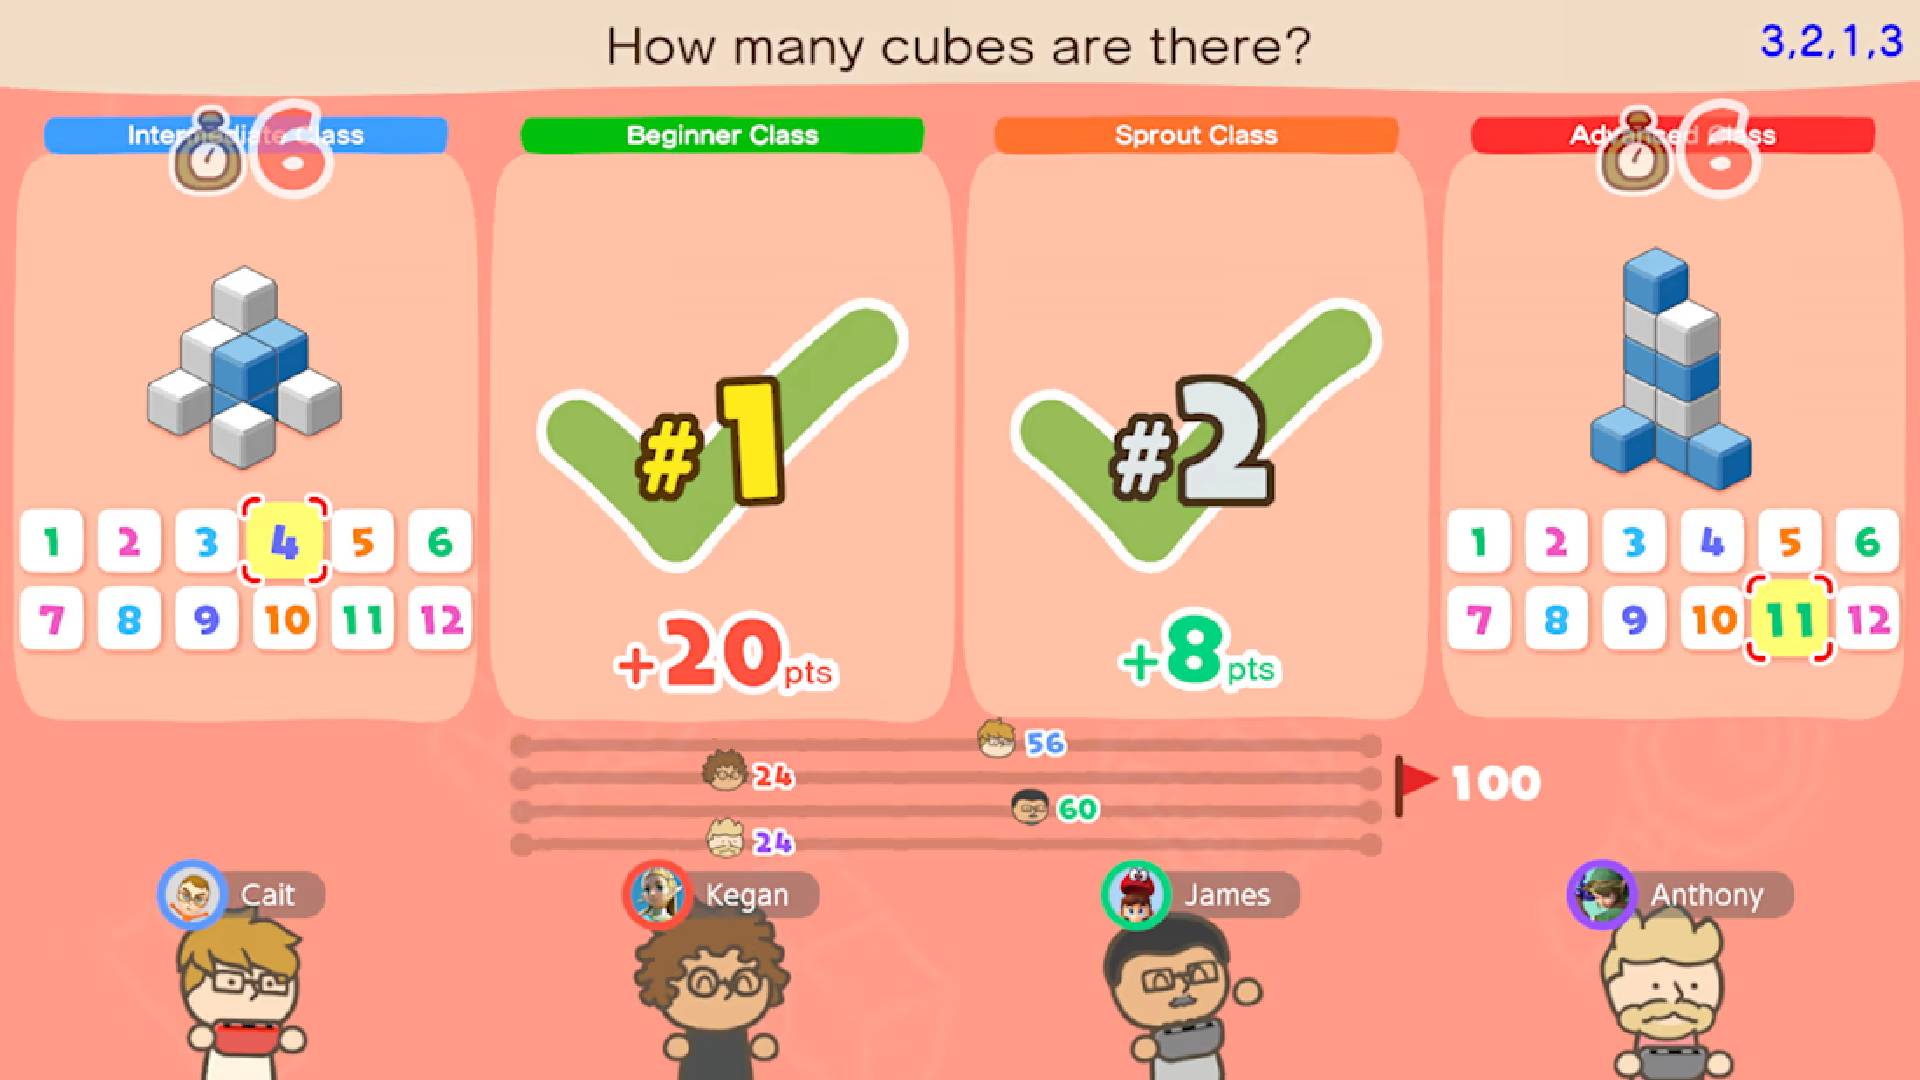 Cool math games: a four player game is shown, where everyone must count the amount of cubes that make up a shape